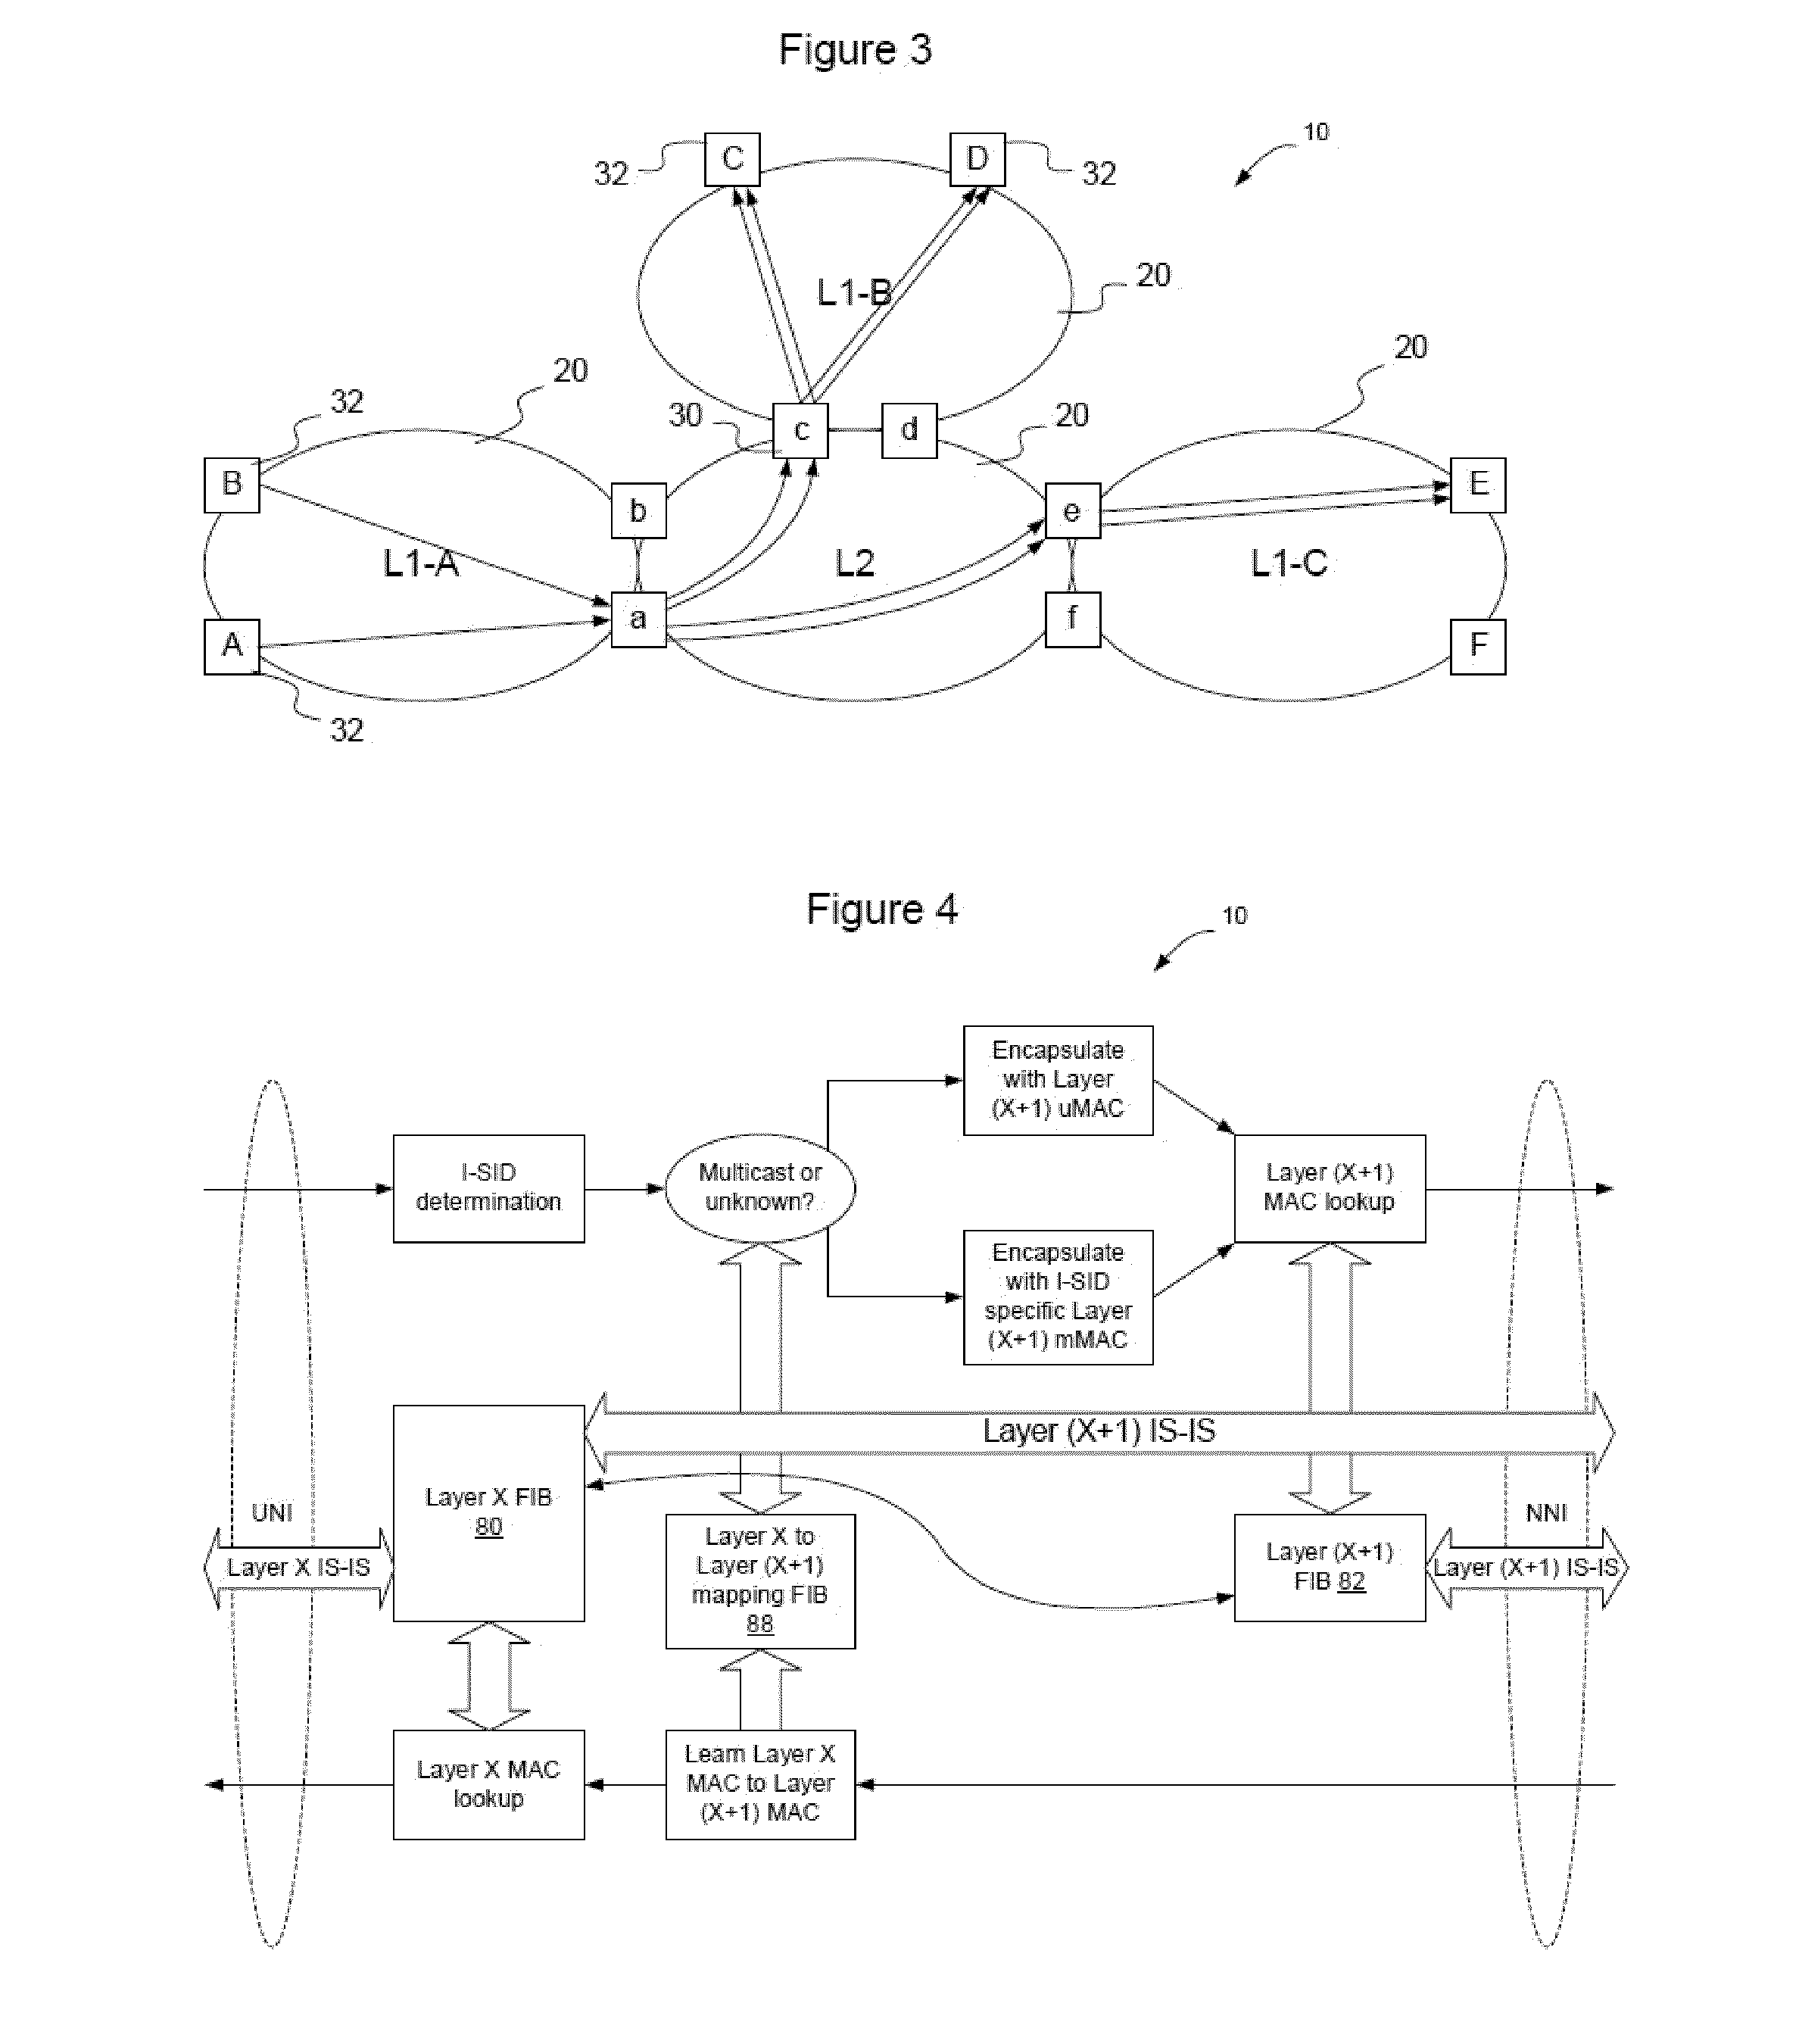 Method and apparatus for exchanging routing information and establishing connectivity across multiple network areas